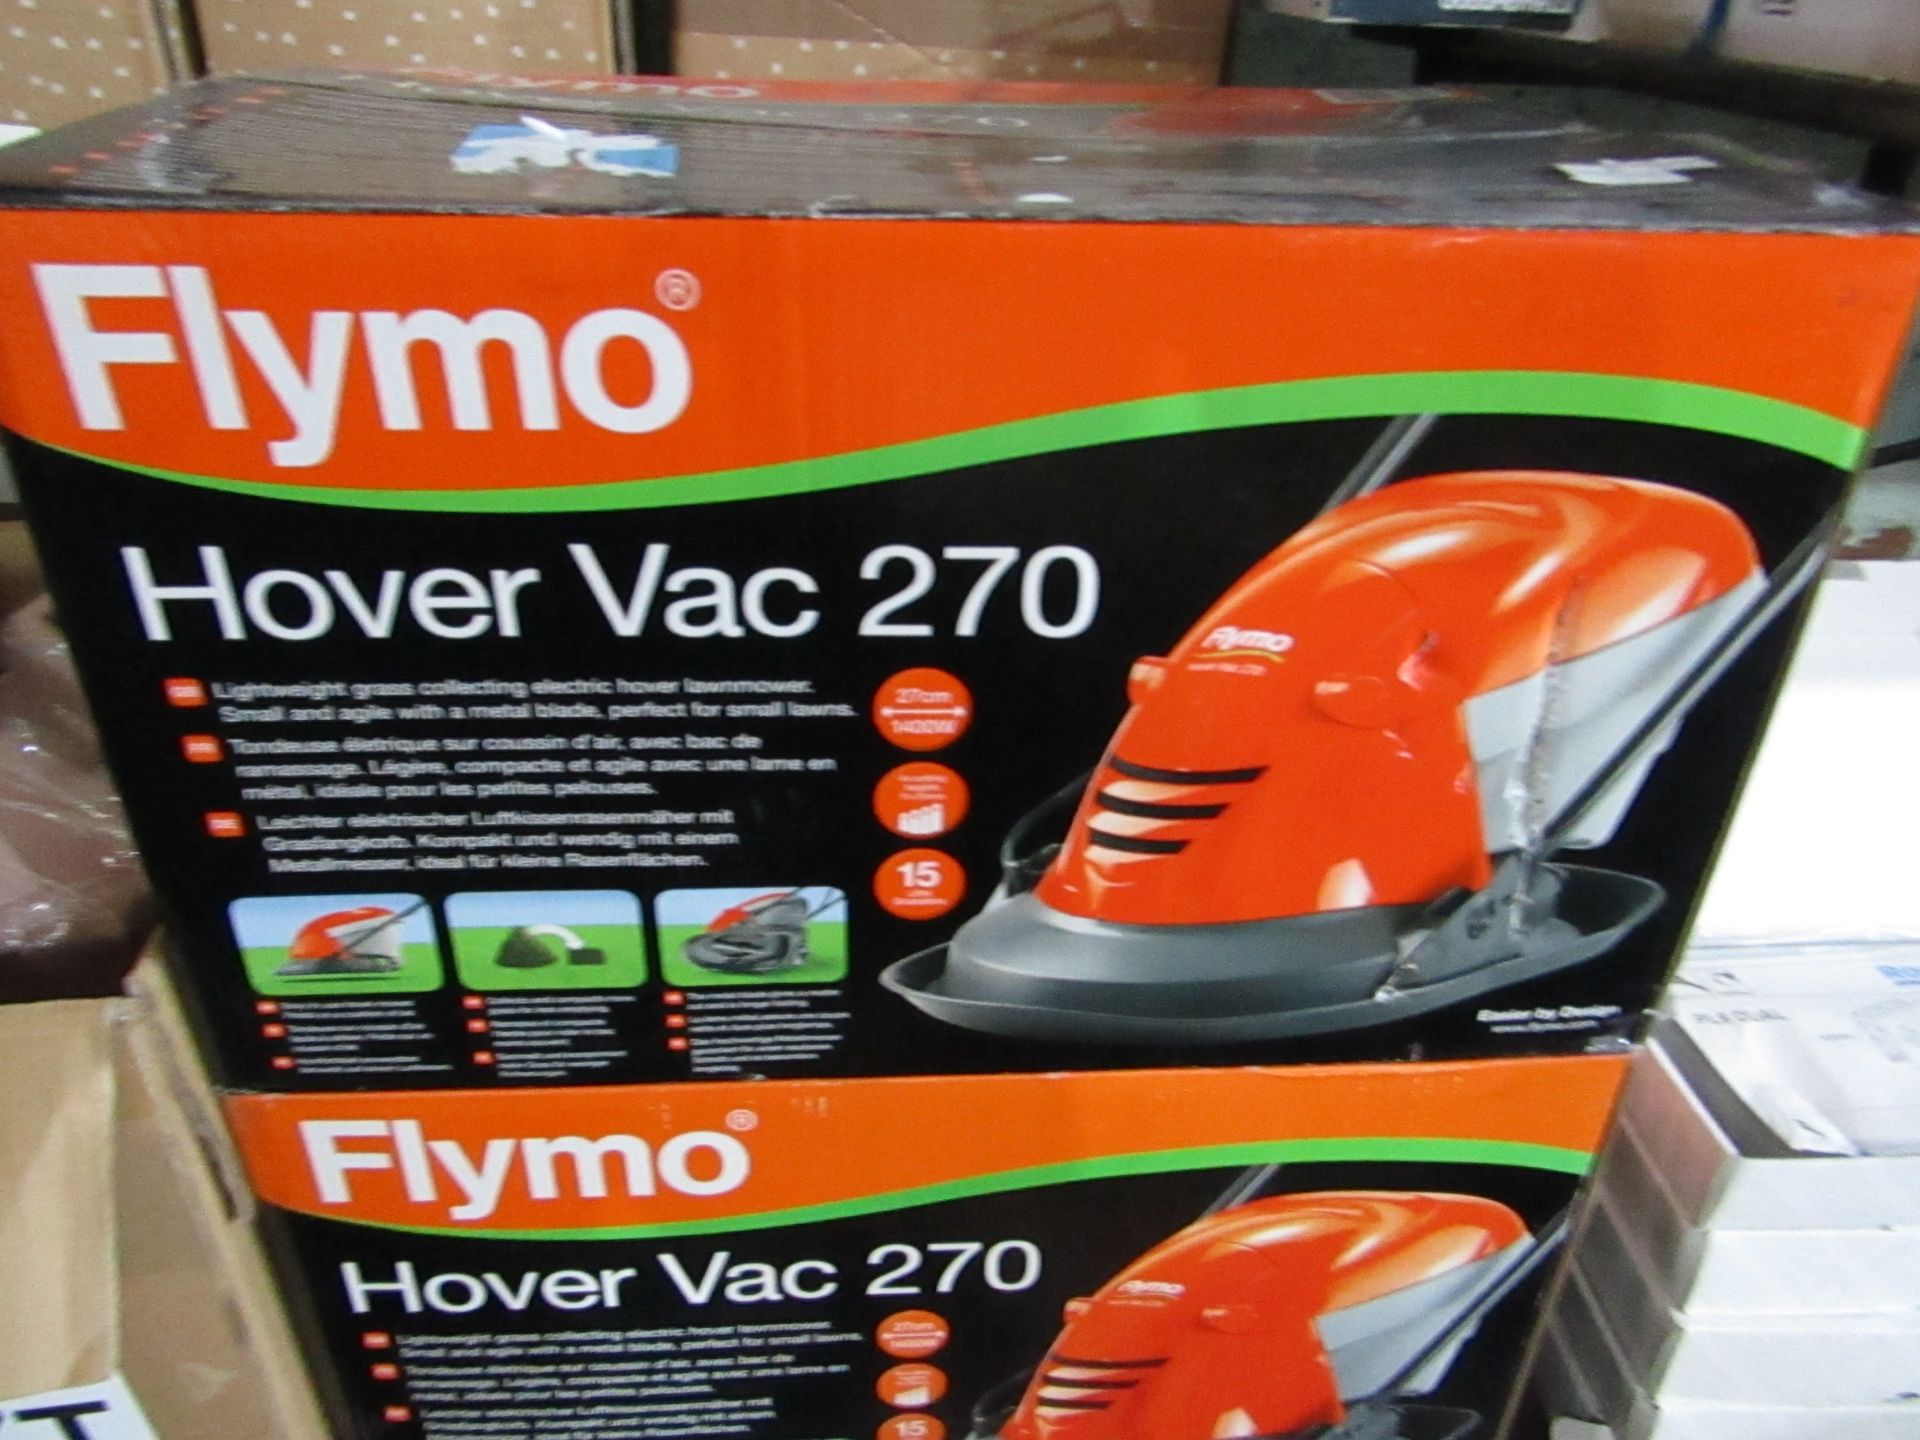 Flymo - Corded Electric Hover Vac 270 Lawnmower - Used Condition, Untested & Boxed. RRP œ95.